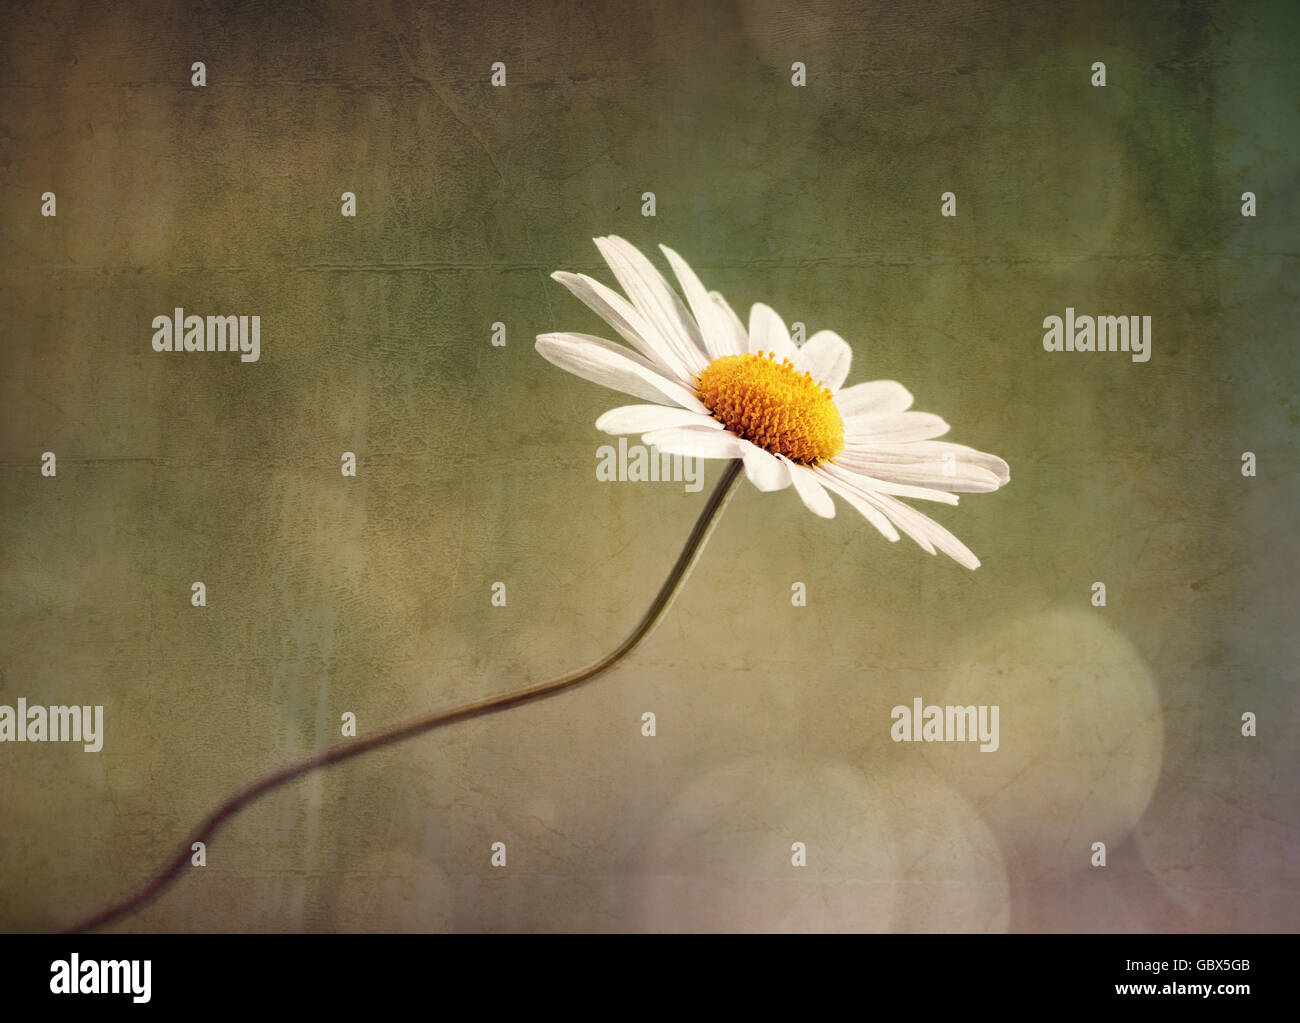 Daisy or camomile nature background Stock Photo